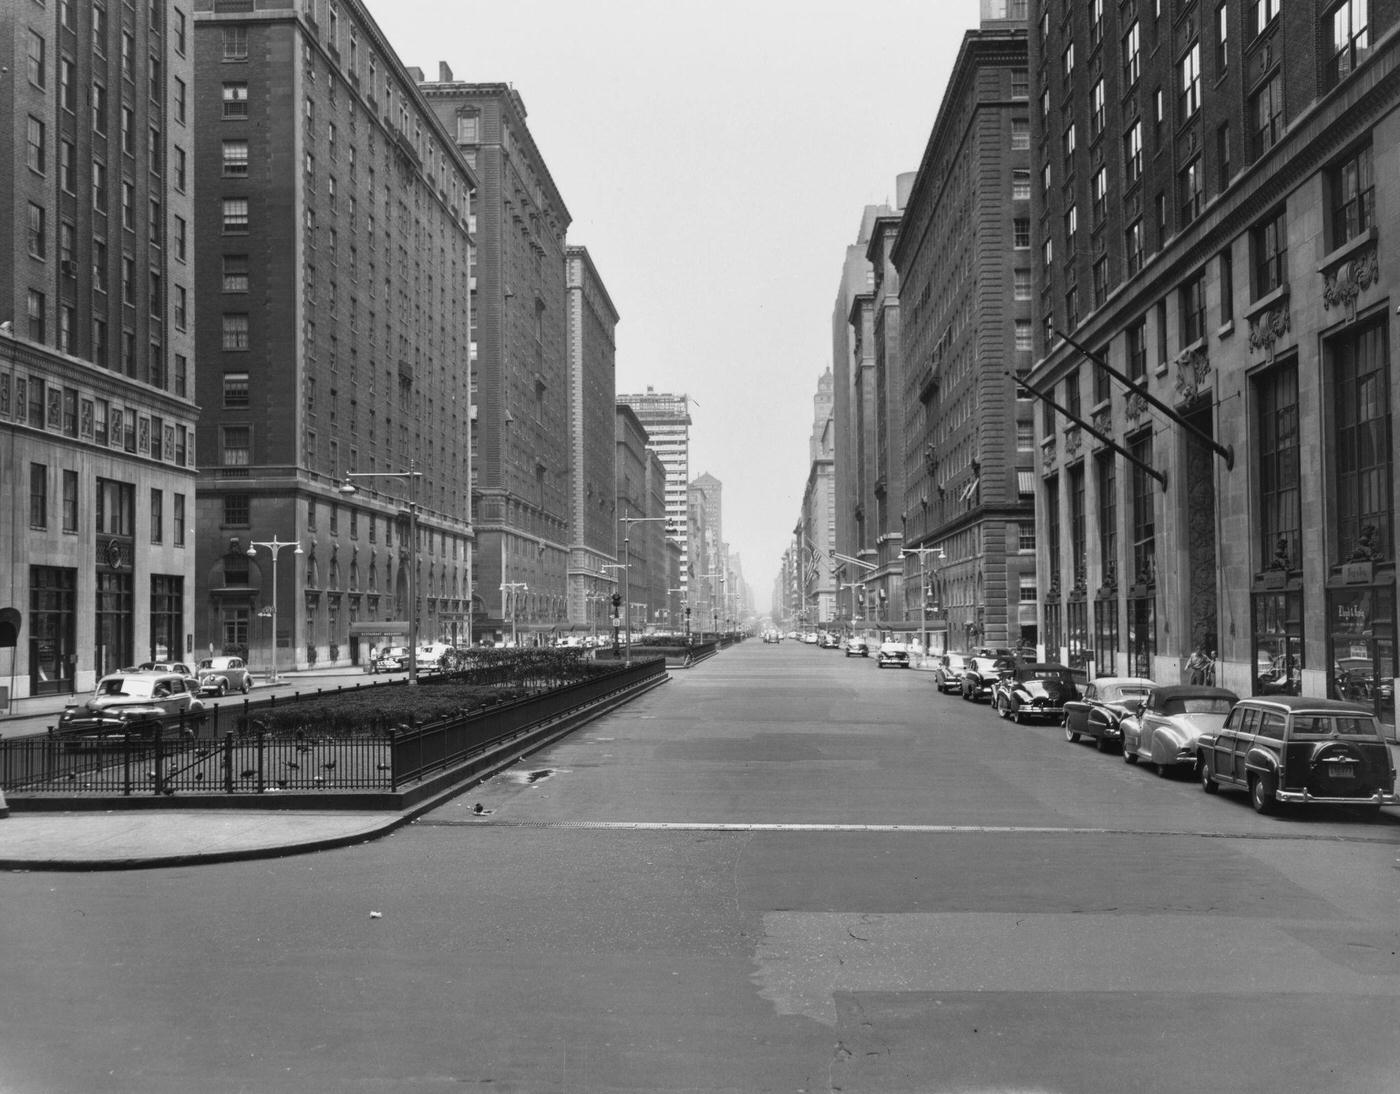 Park Avenue, New York City: Cars Parked On Park Avenue Looking North From East 45Th Street, Manhattan, 1950.